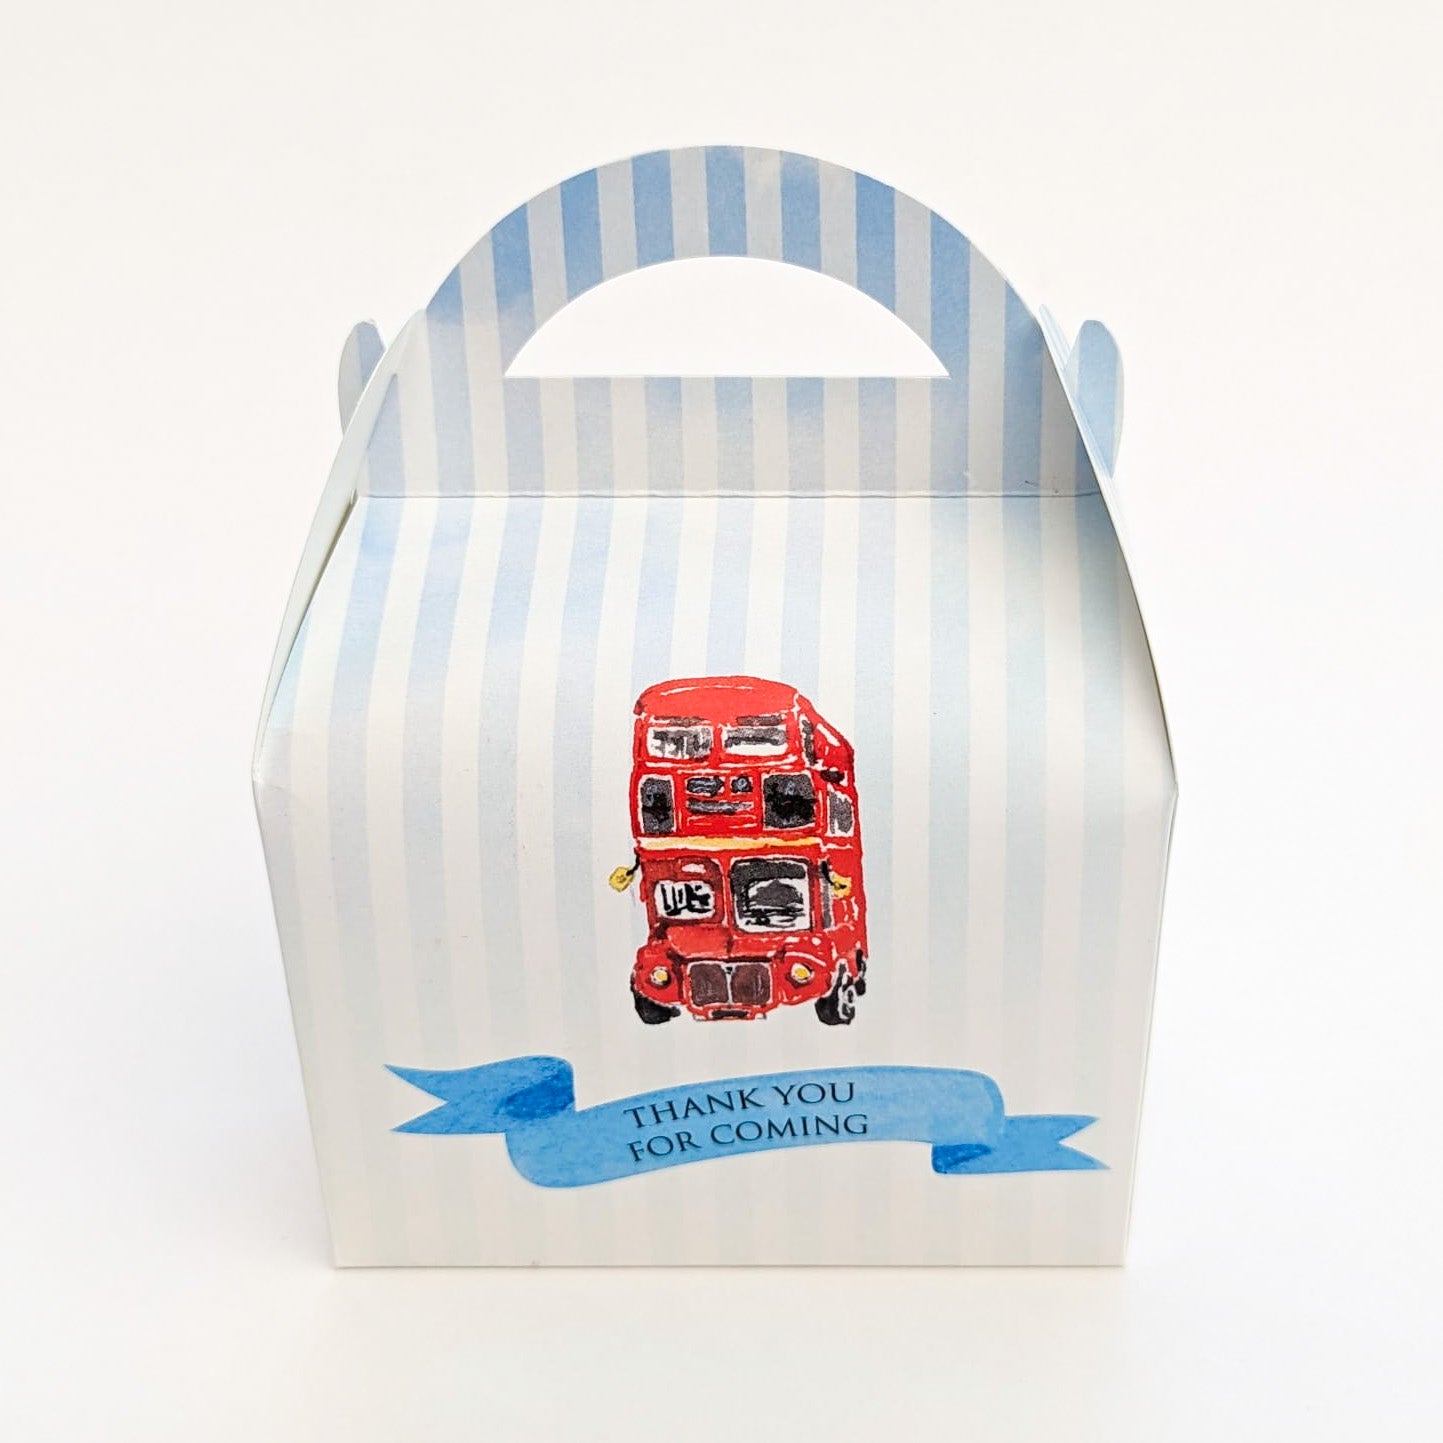 LONDON BUS Children’s Birthday Party Treat boxes Gift Favour